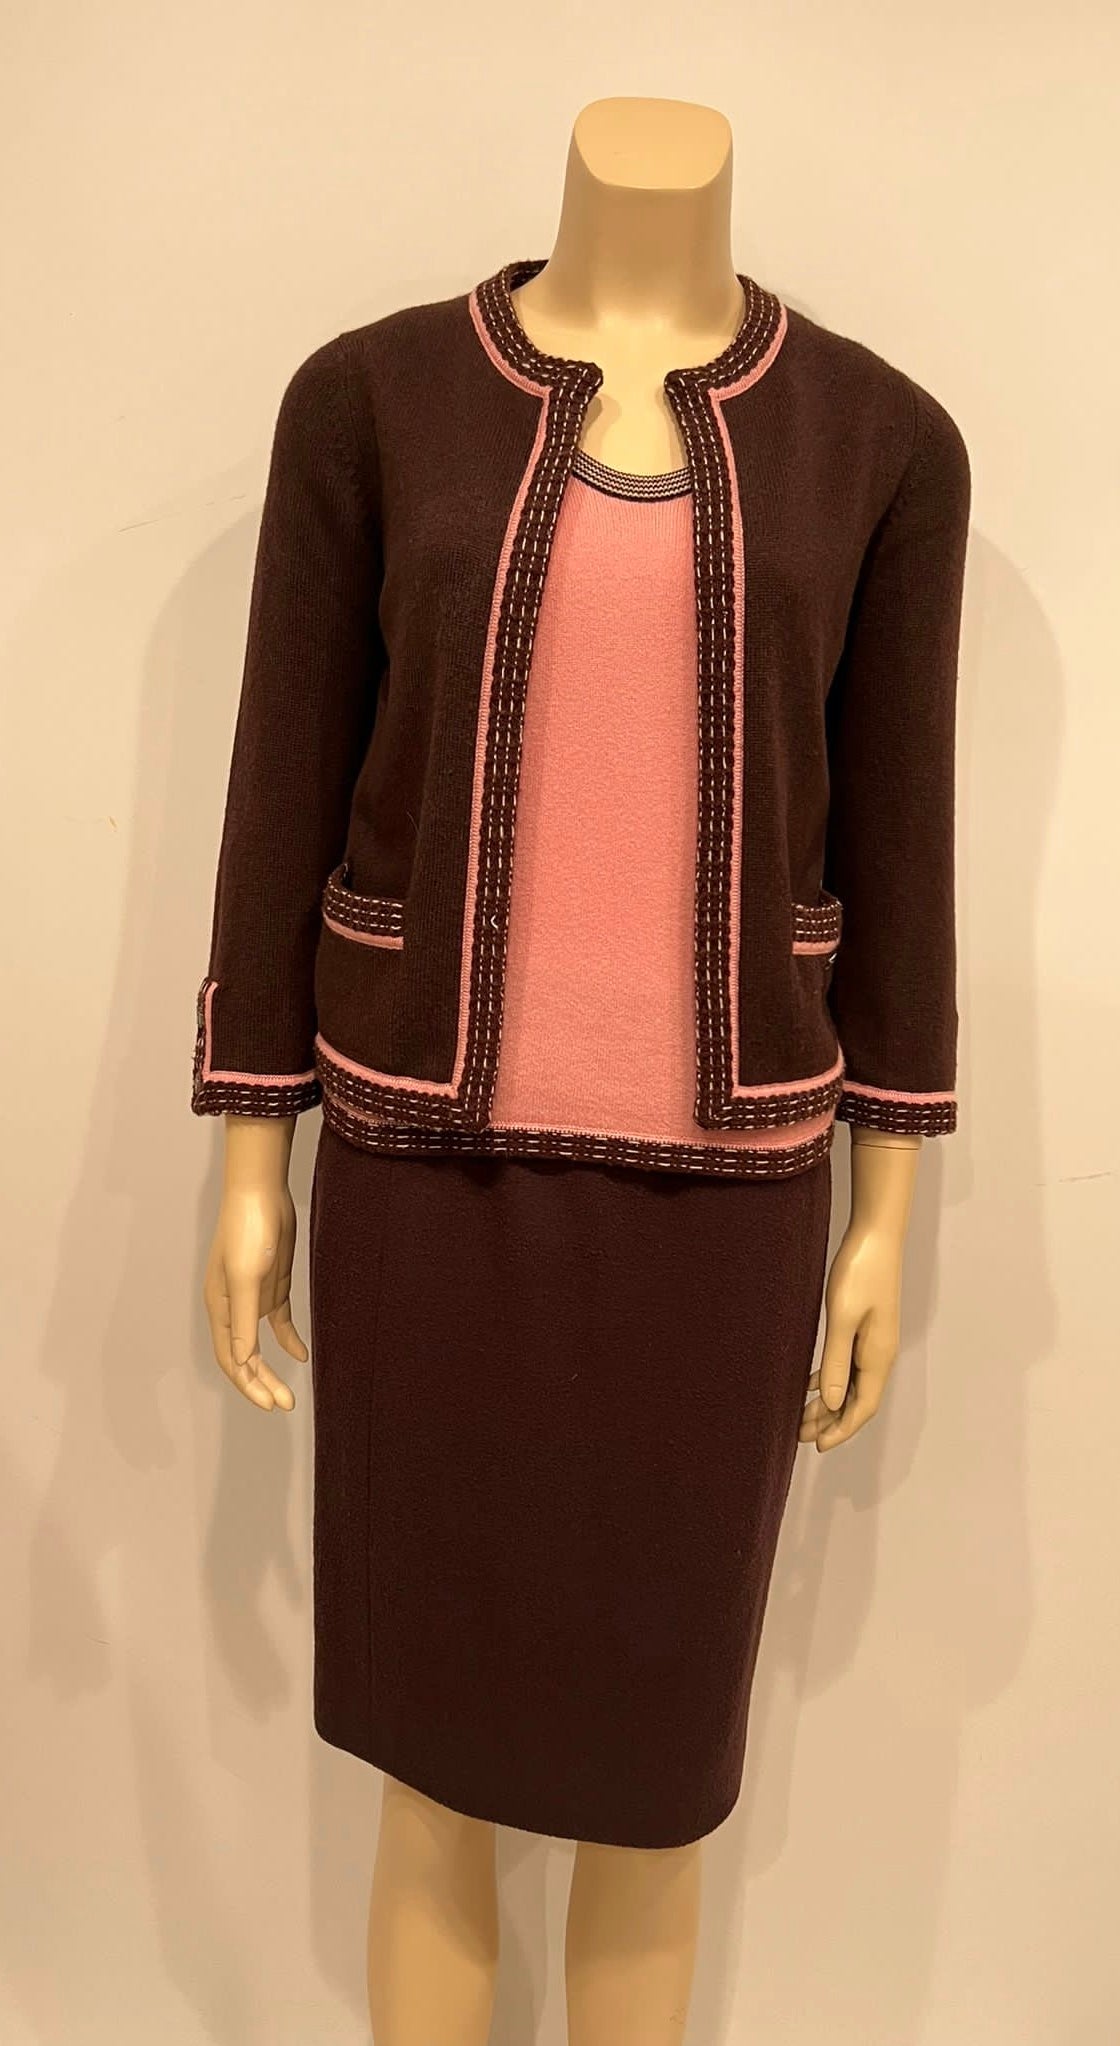 HelensChanel Chanel 05A 2005 Fall Cashmere Pink Brown Camisole Blouse Cardigan Twinset FR 34 US 2/4